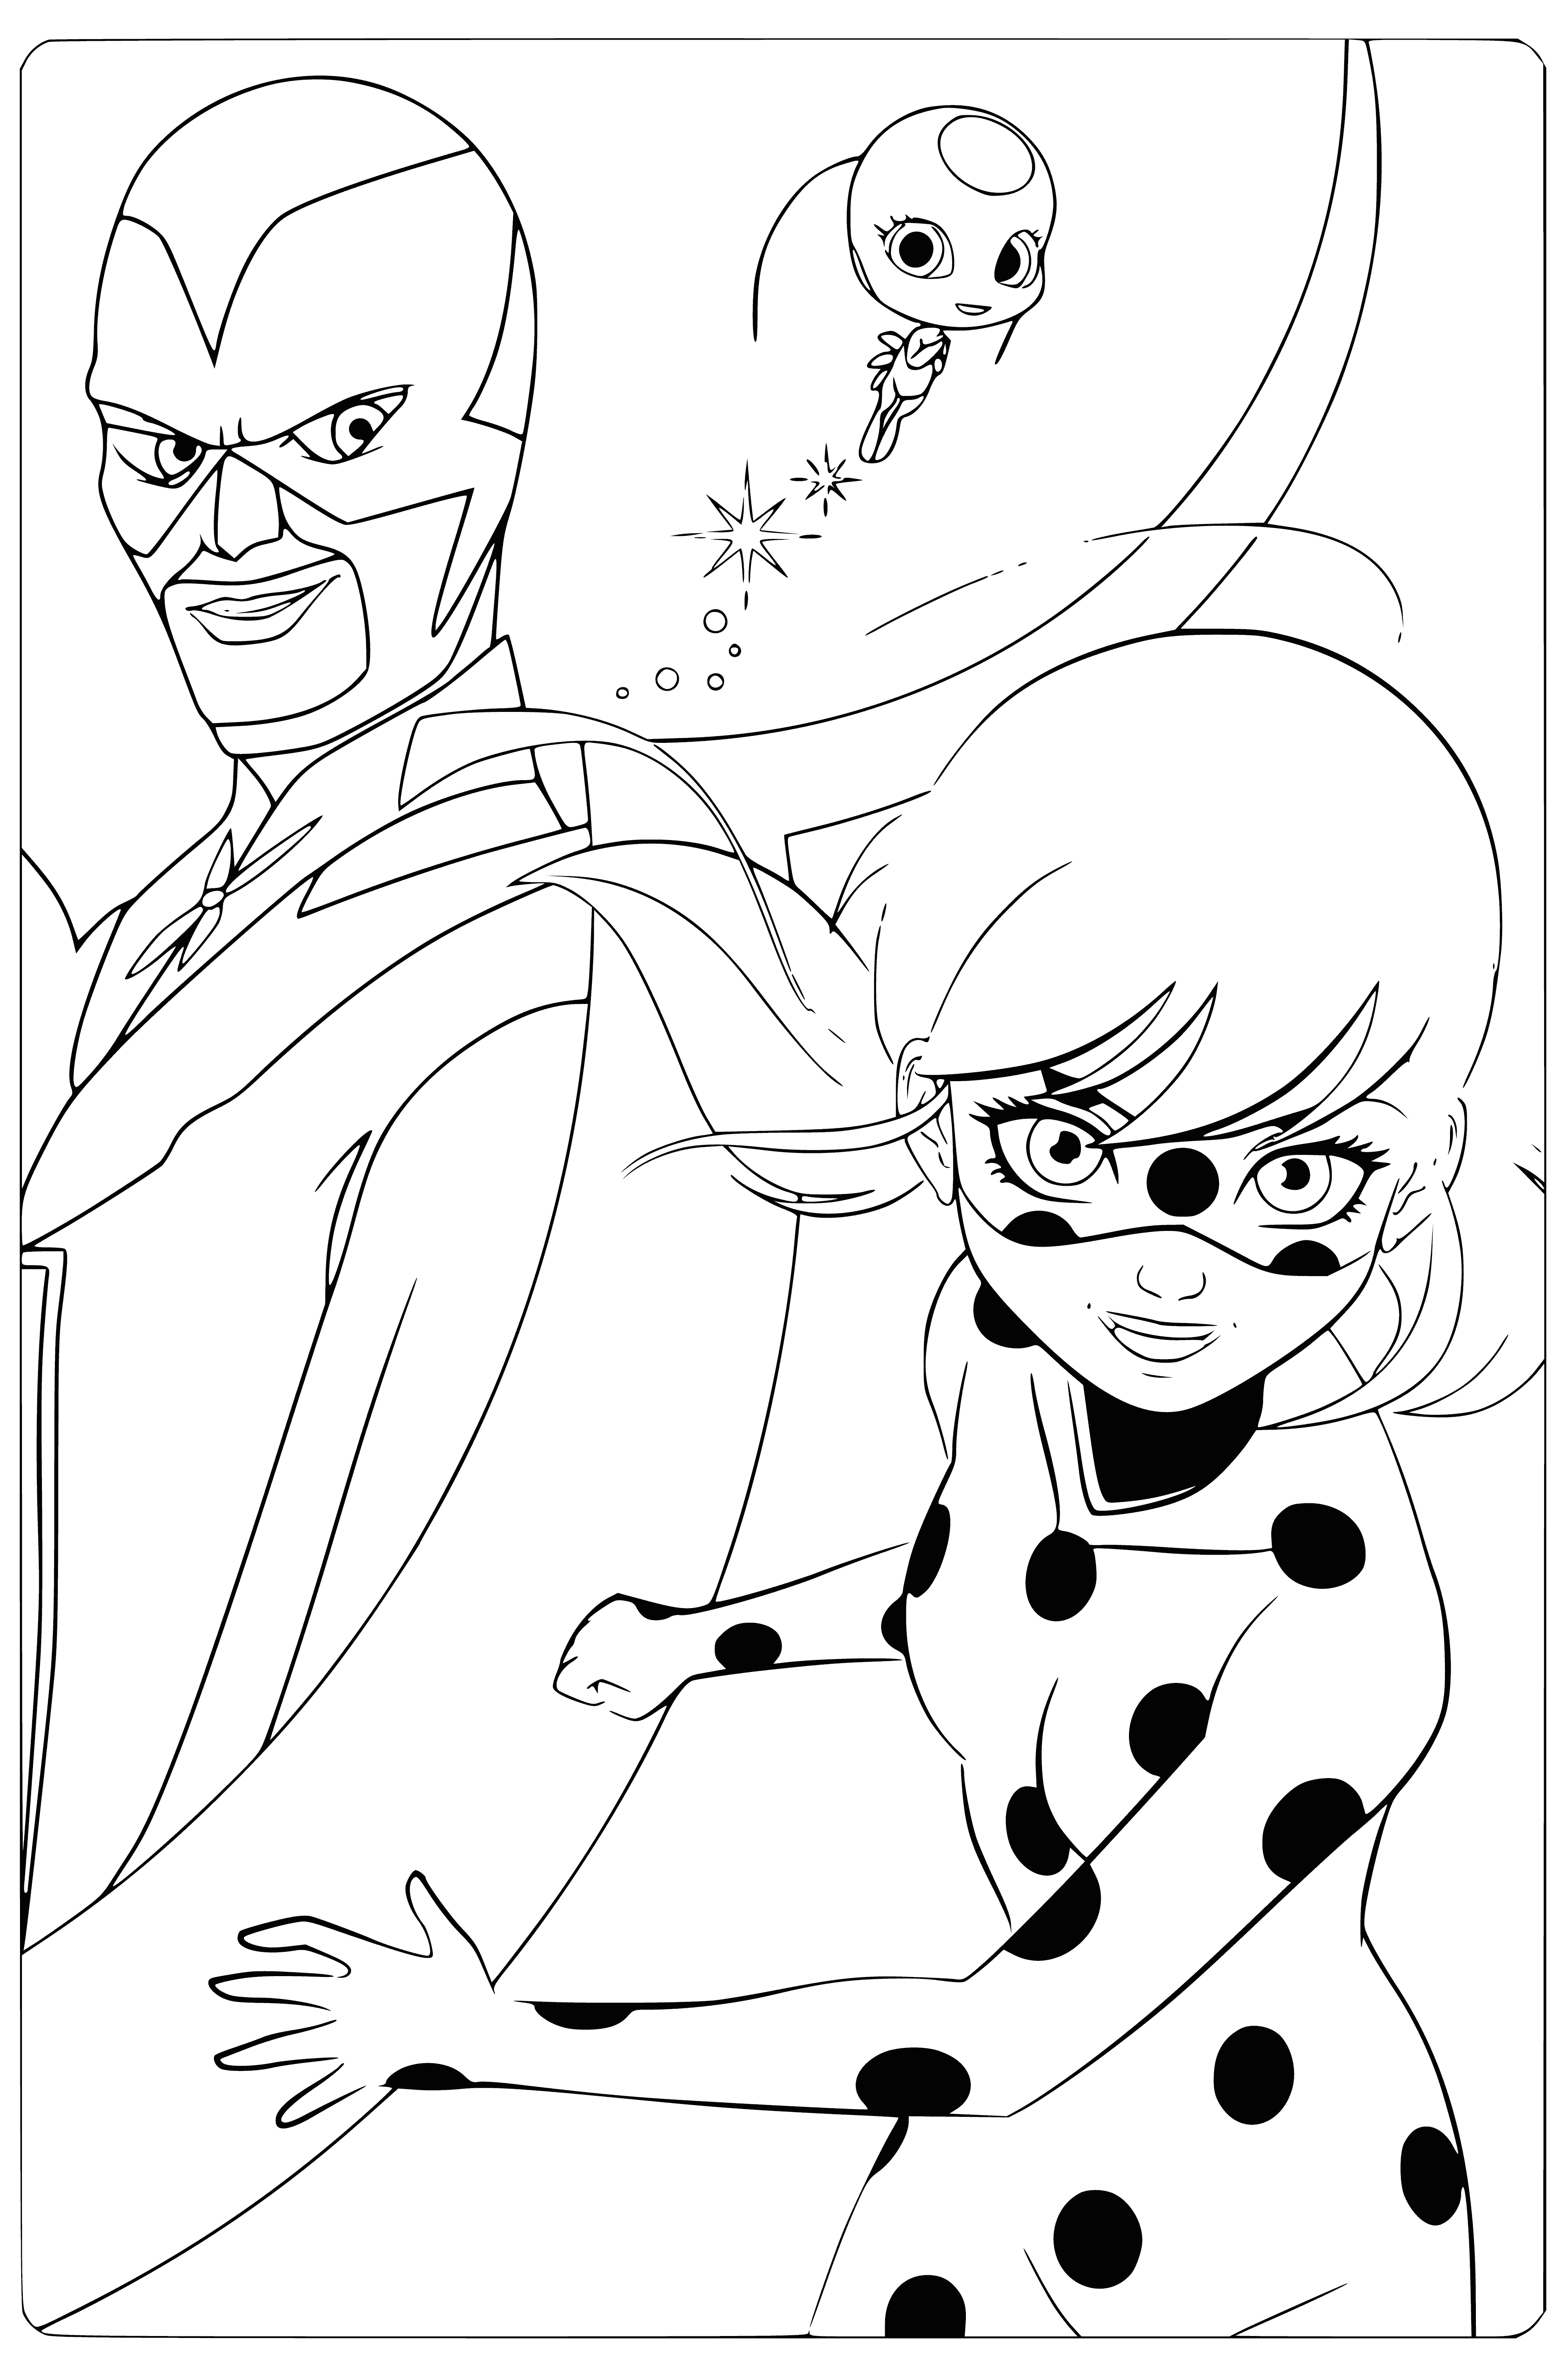 coloring page: Hawk Moth is a supervillain who seeks power and Tikki is a Kwami who helps Ladybug protect Paris from evil.